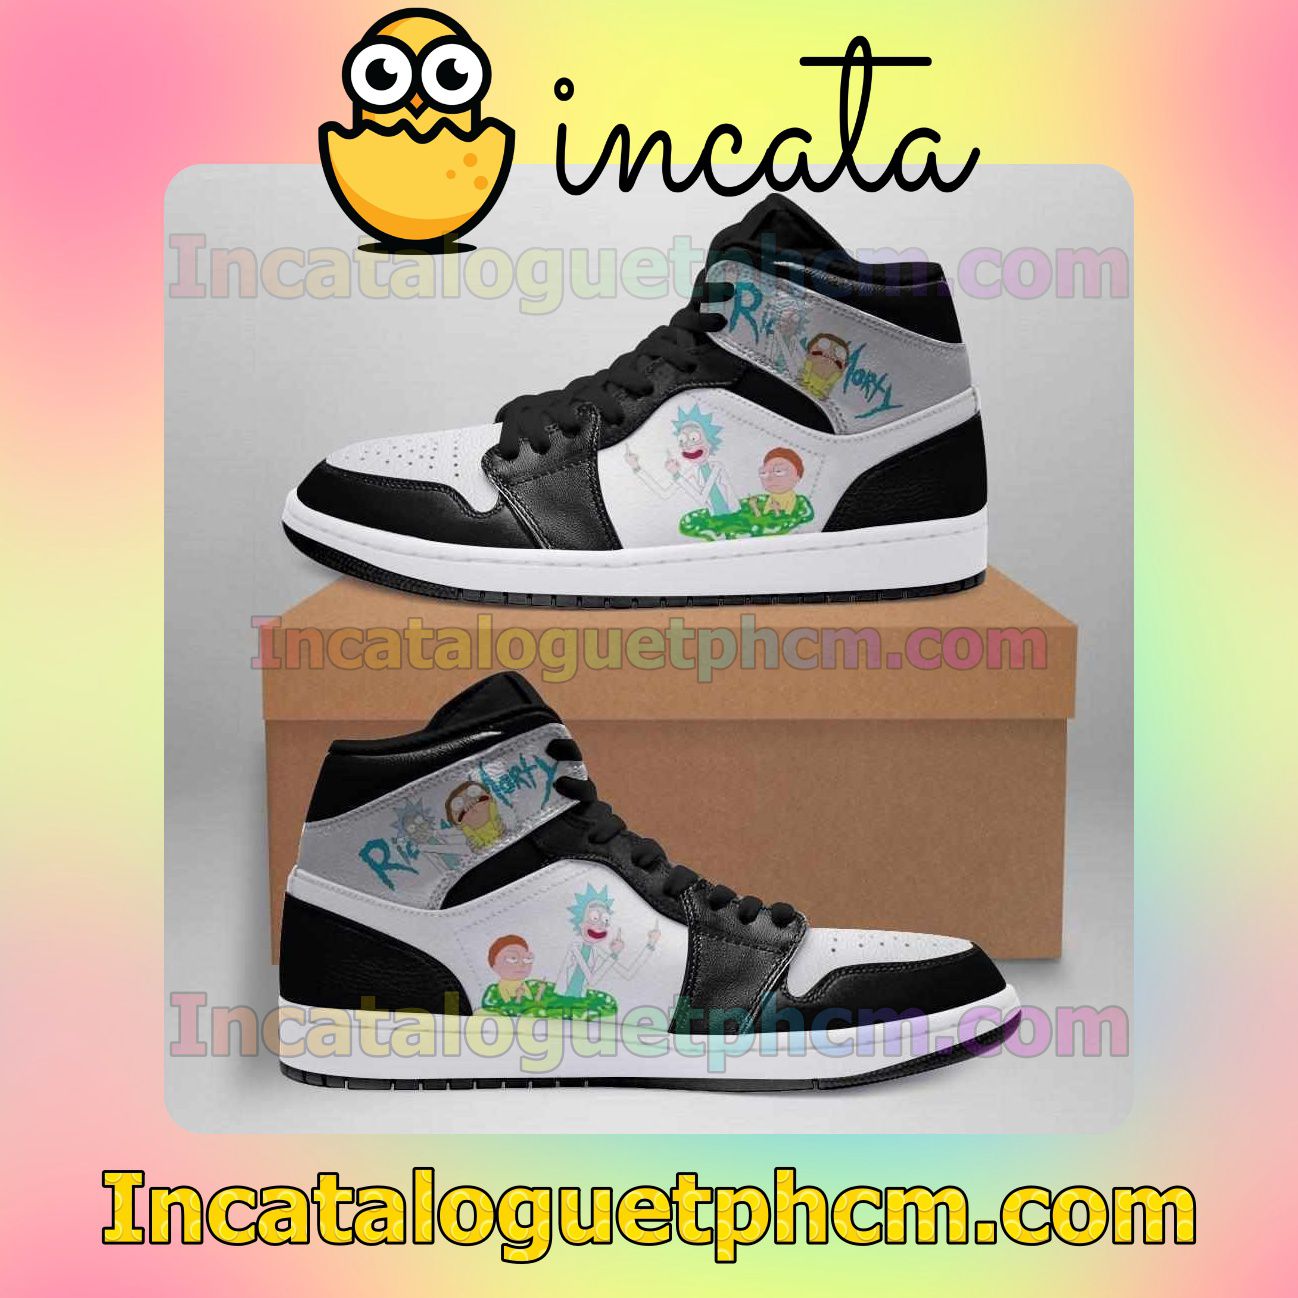 Black White Rick And Morty 1s Air Jordan 1 Inspired Shoes